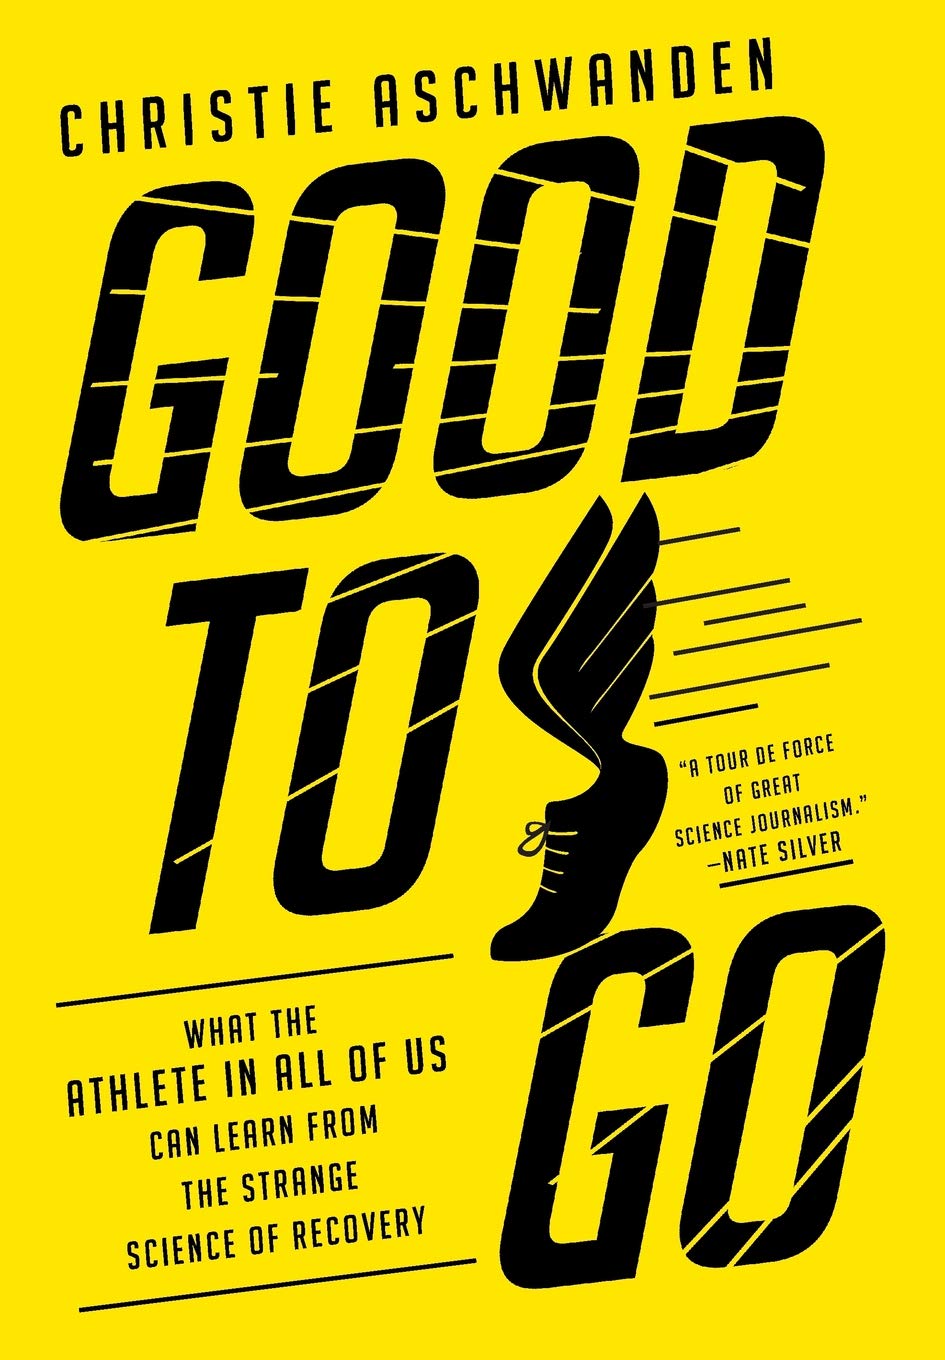 The 7 Best Workout Books of 2021 - Book Good to Go by Christie Aschwanden